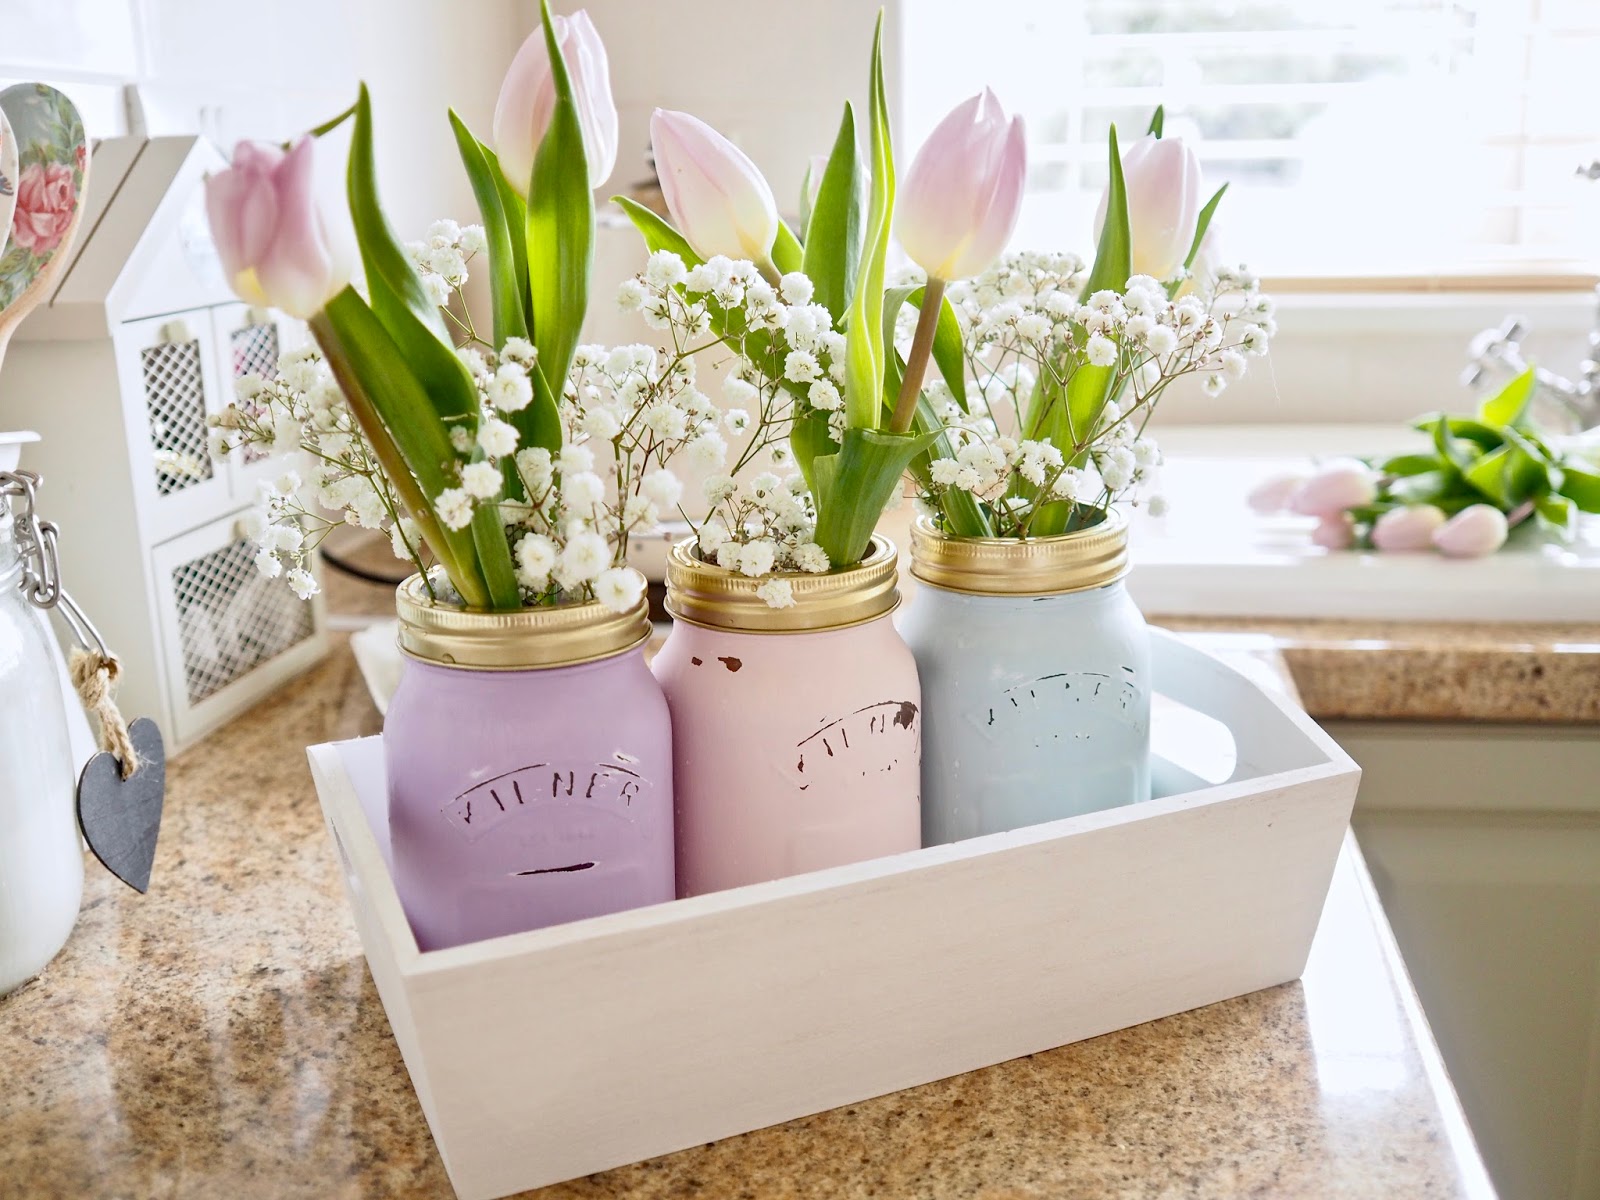 Video:Mother's day DIY gifts using chalk paint and jars.